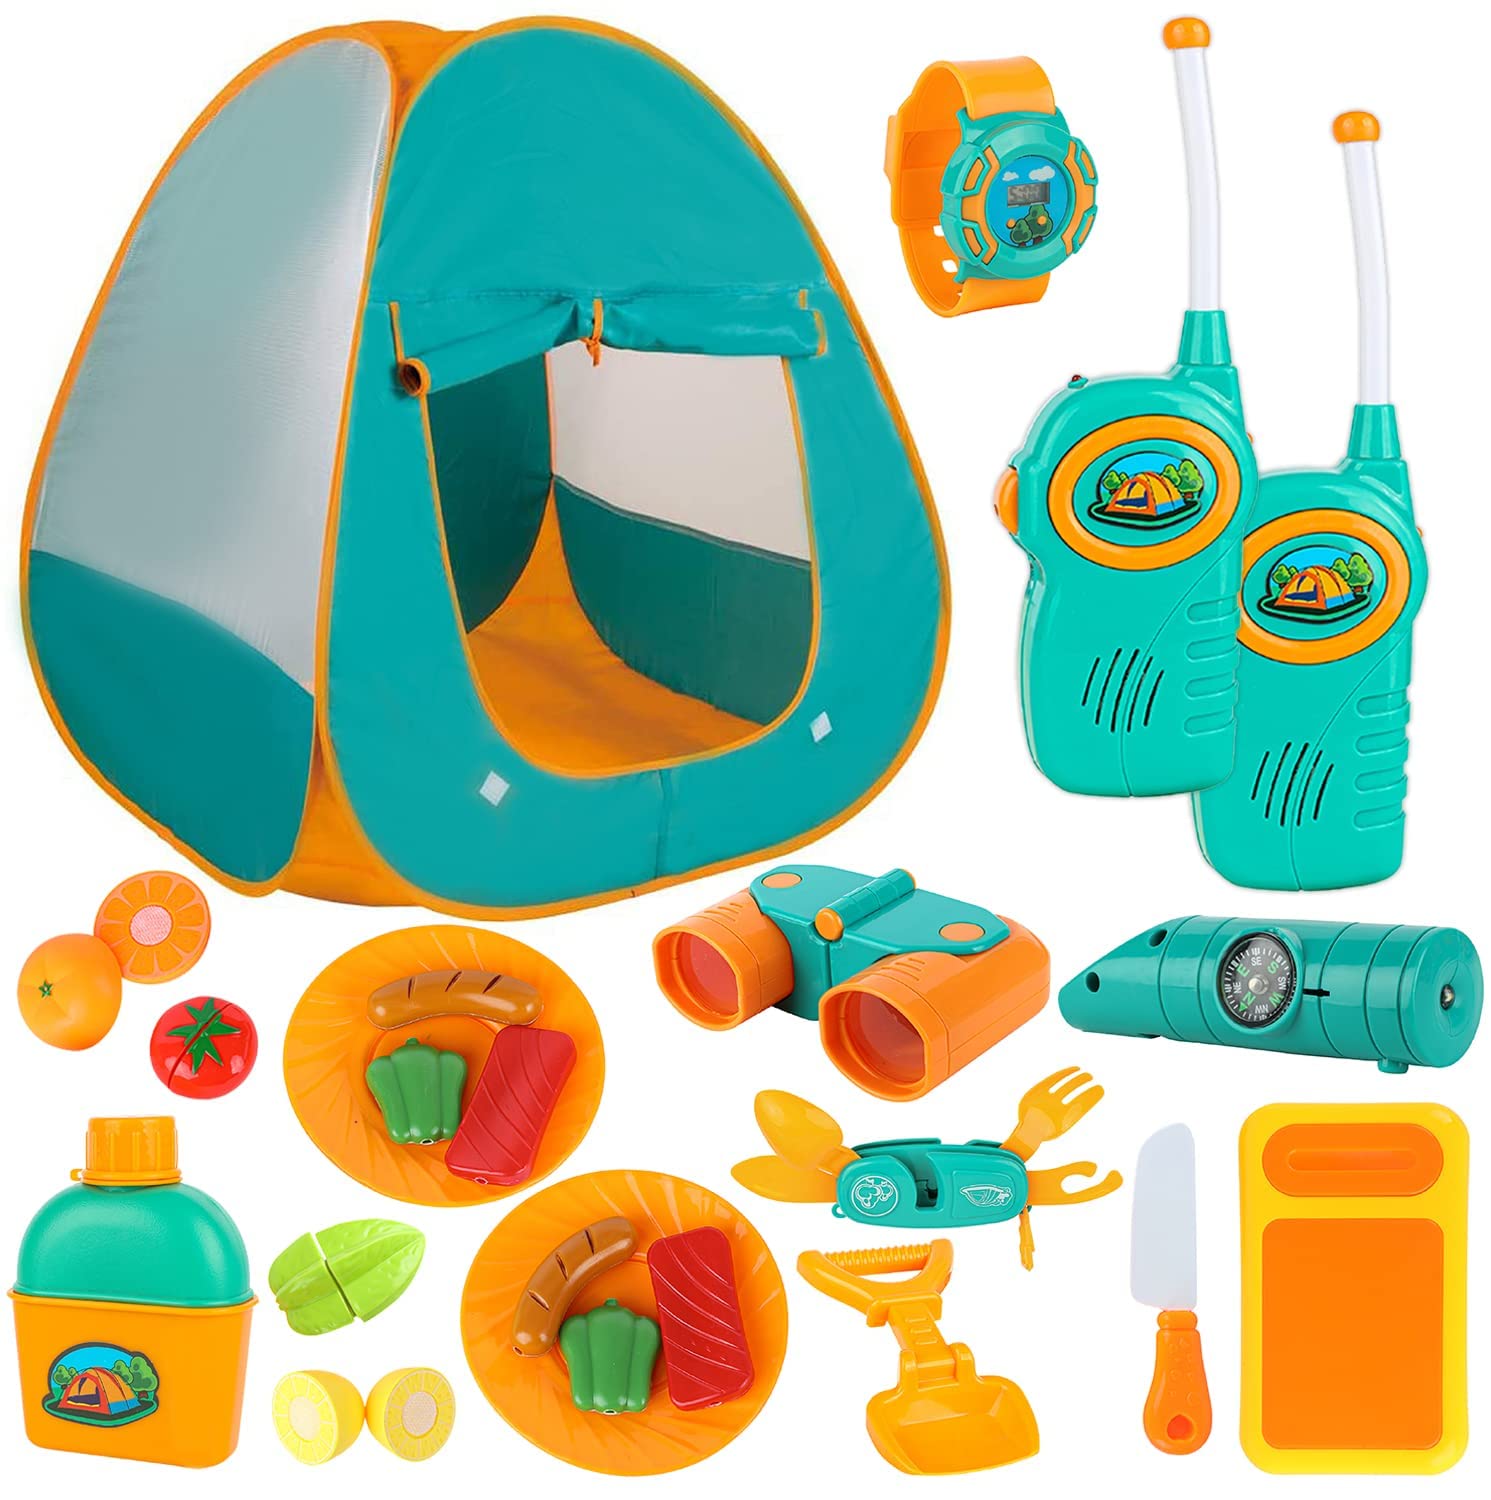 ToyVelt Kids Camping Tent Set -Includes Tent, Telescope, 2 Walkie Talkies, and Full Camping Gear Set Indoor and Outdoor Toy - Best Present for 3 4 5 6 Year Old Boys and Girls and Up. Updated Version